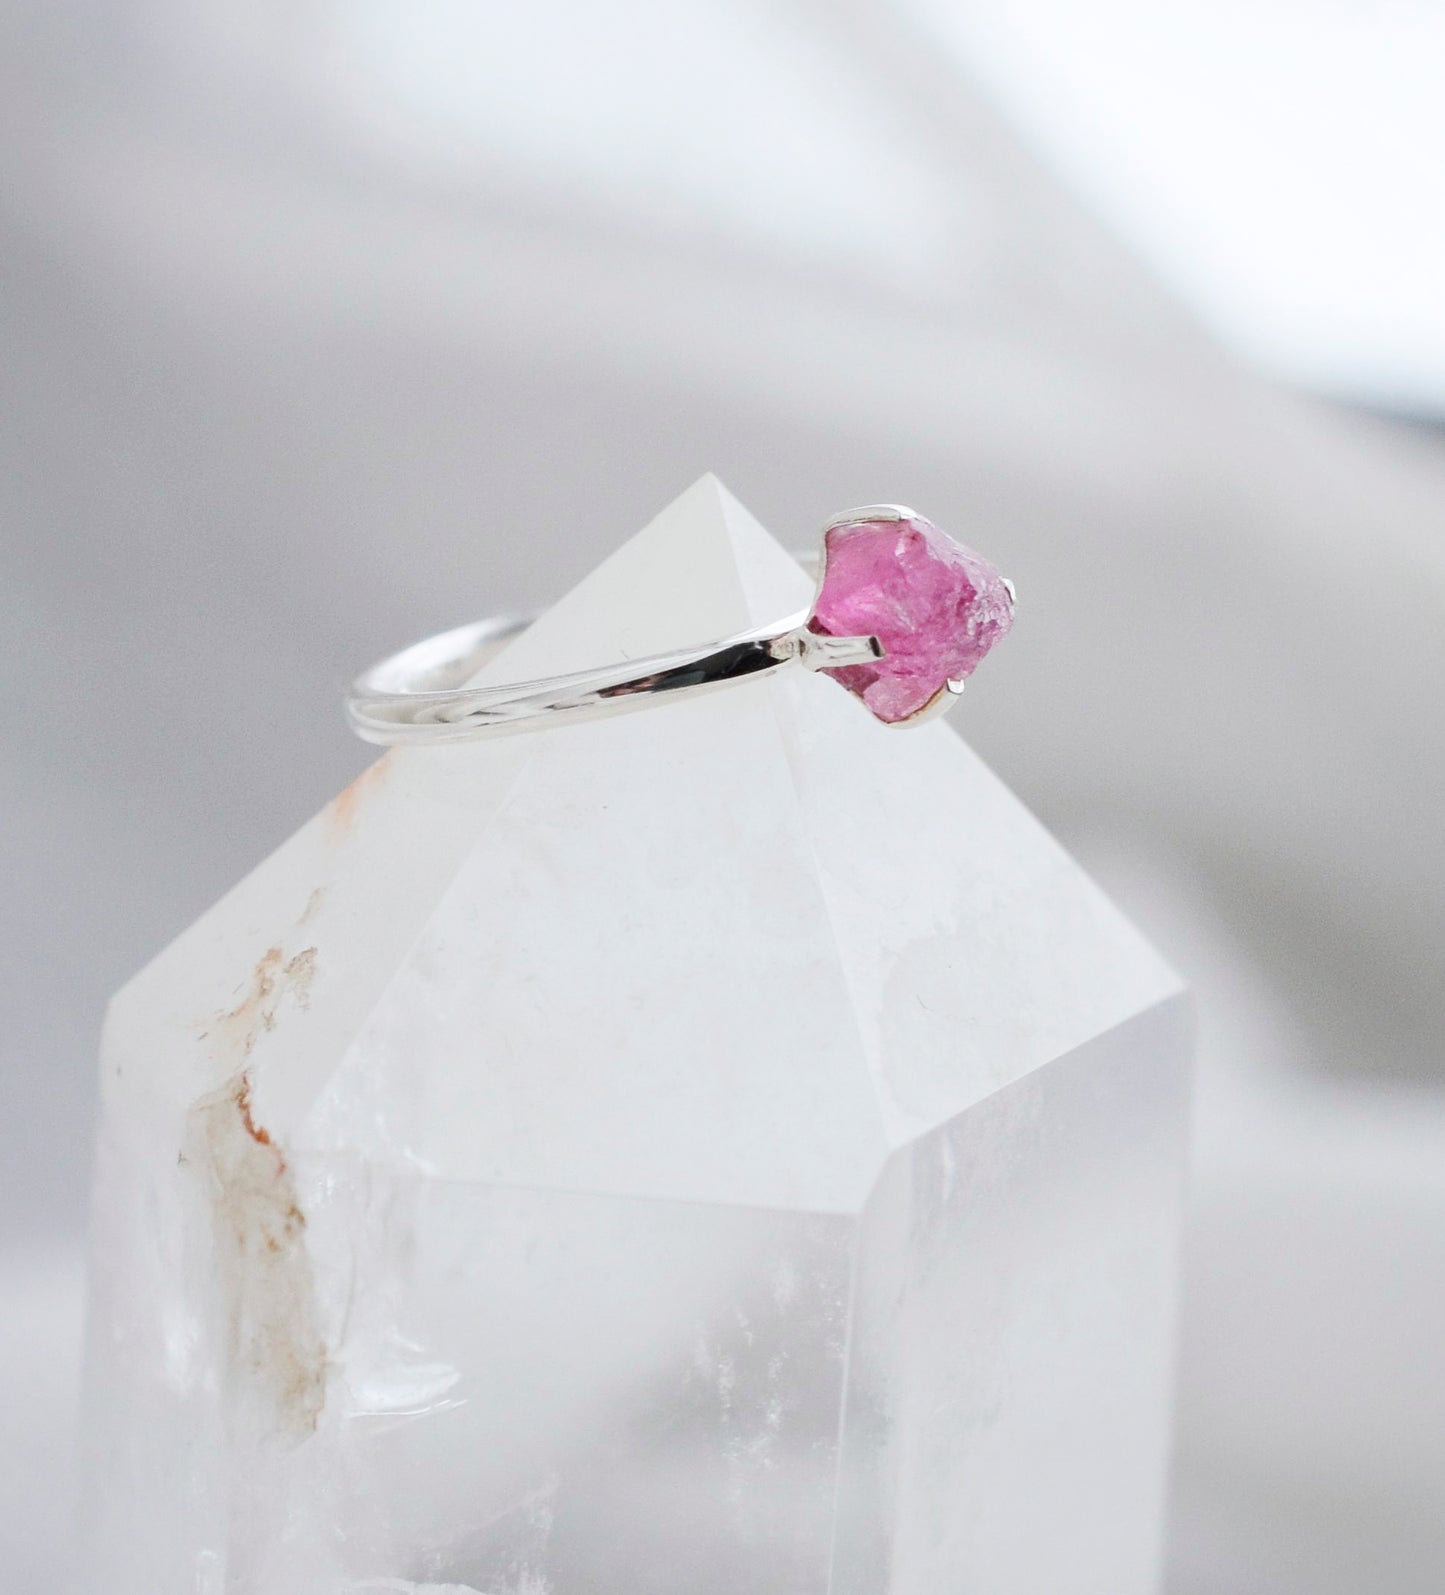 Side view of a raw Pink Tourmaline crystal set onto a sterling silver ring.